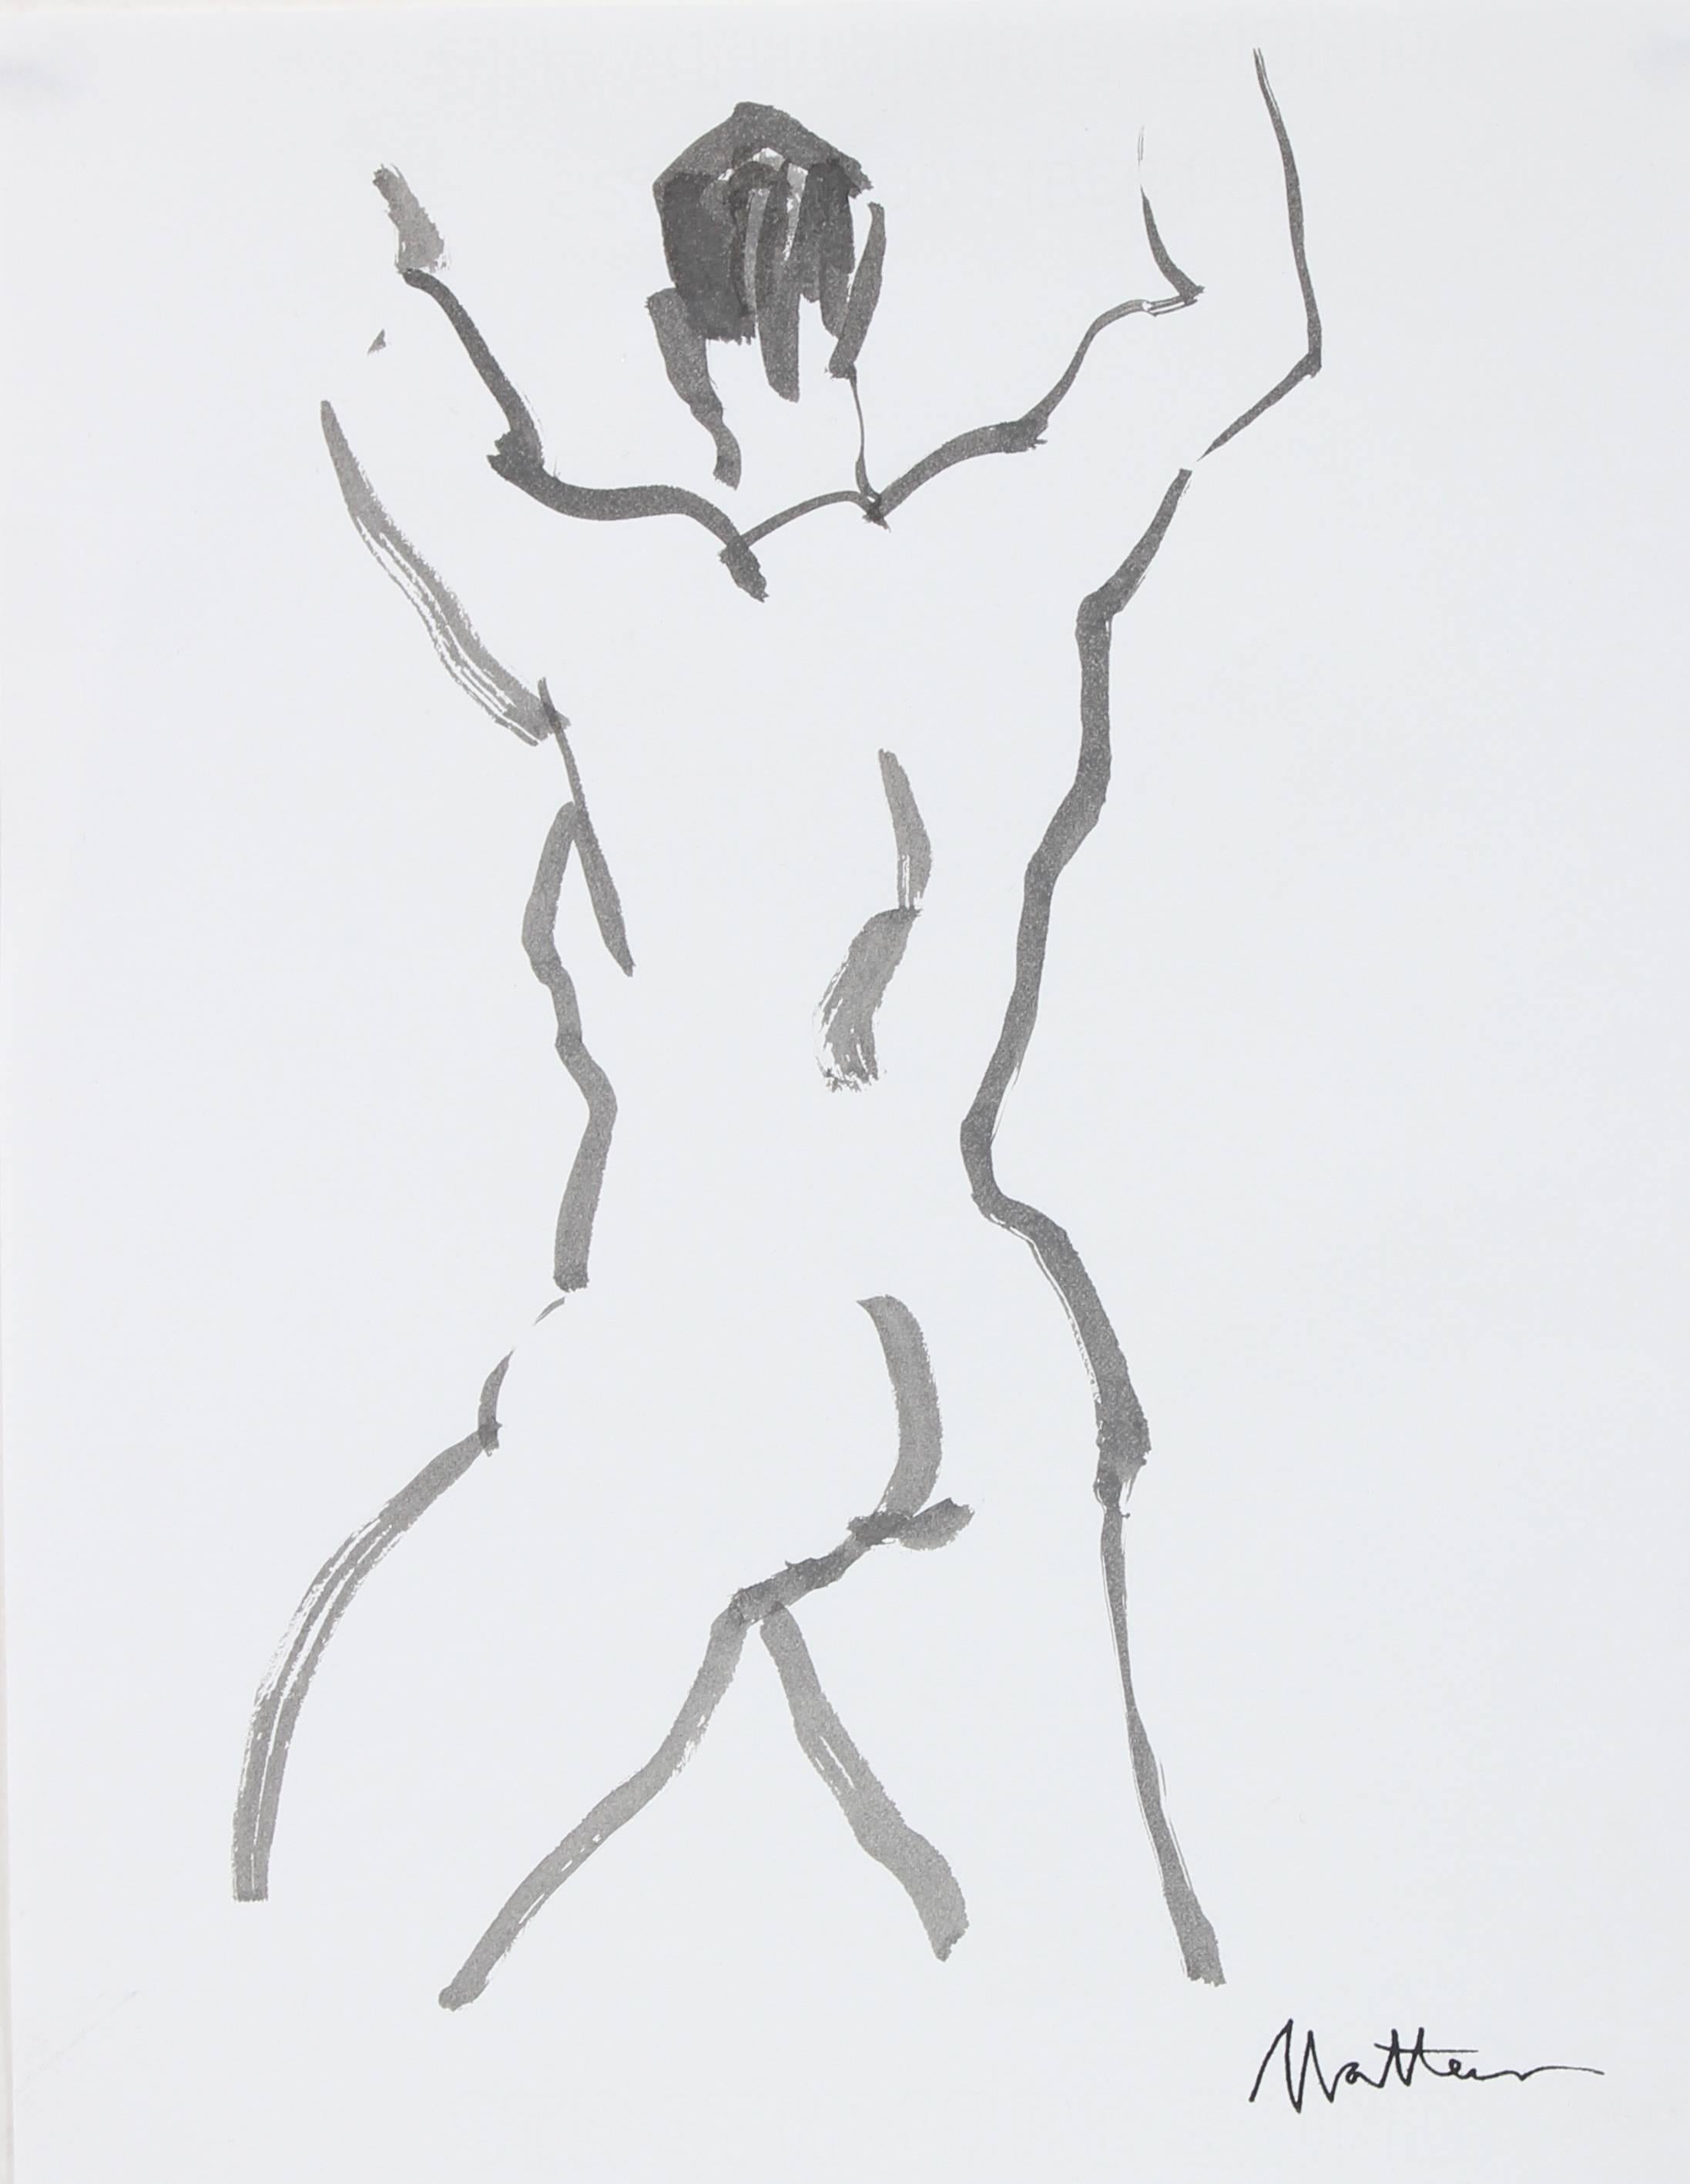 Rip Matteson Figurative Art - Nude Figurative Line Drawing in Ink Wash on Paper, 20th Century